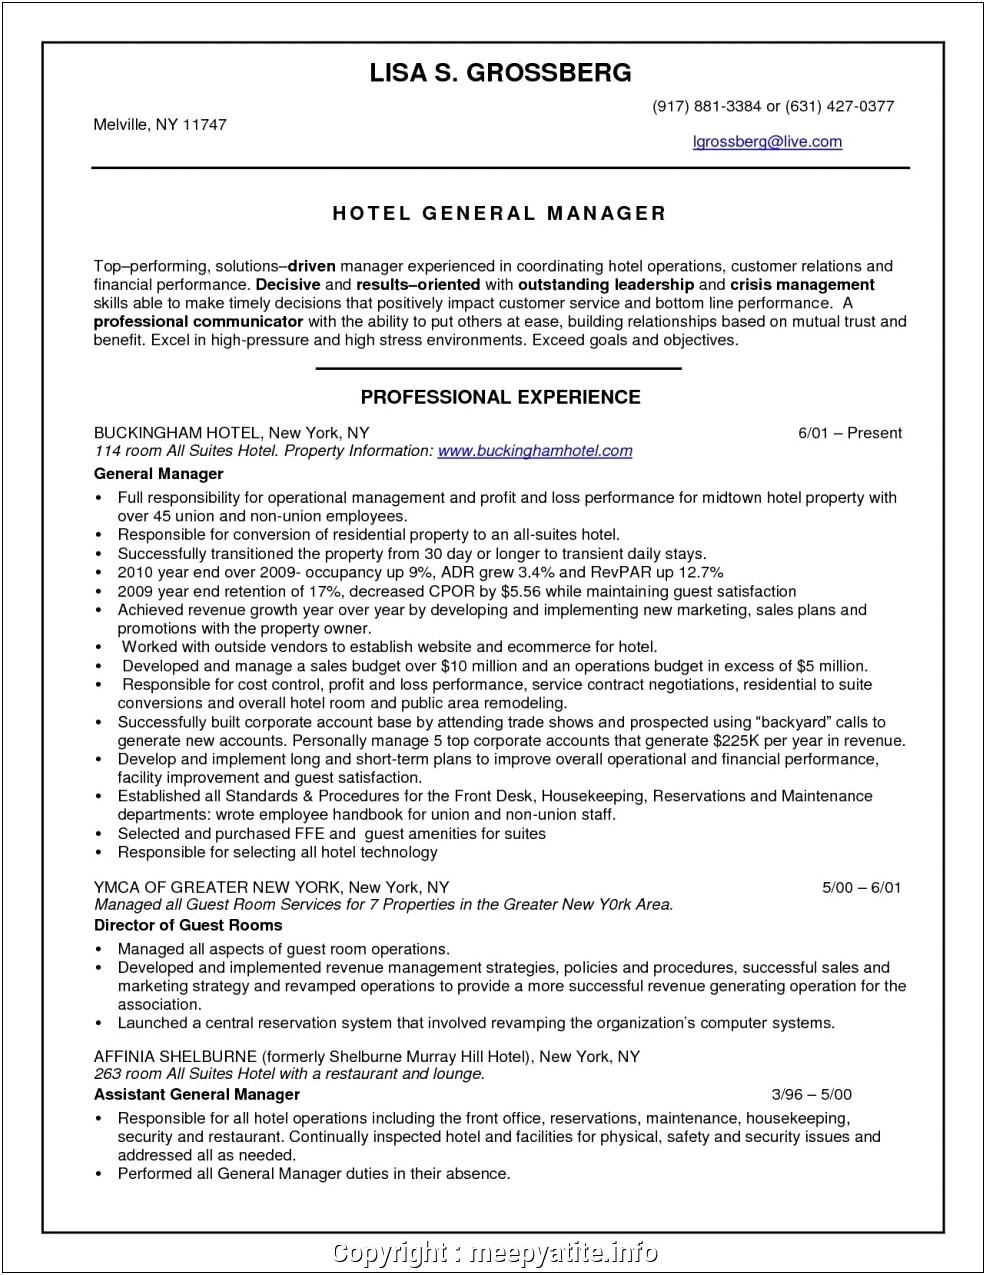 Country Club Food And Beverage Manager Resume